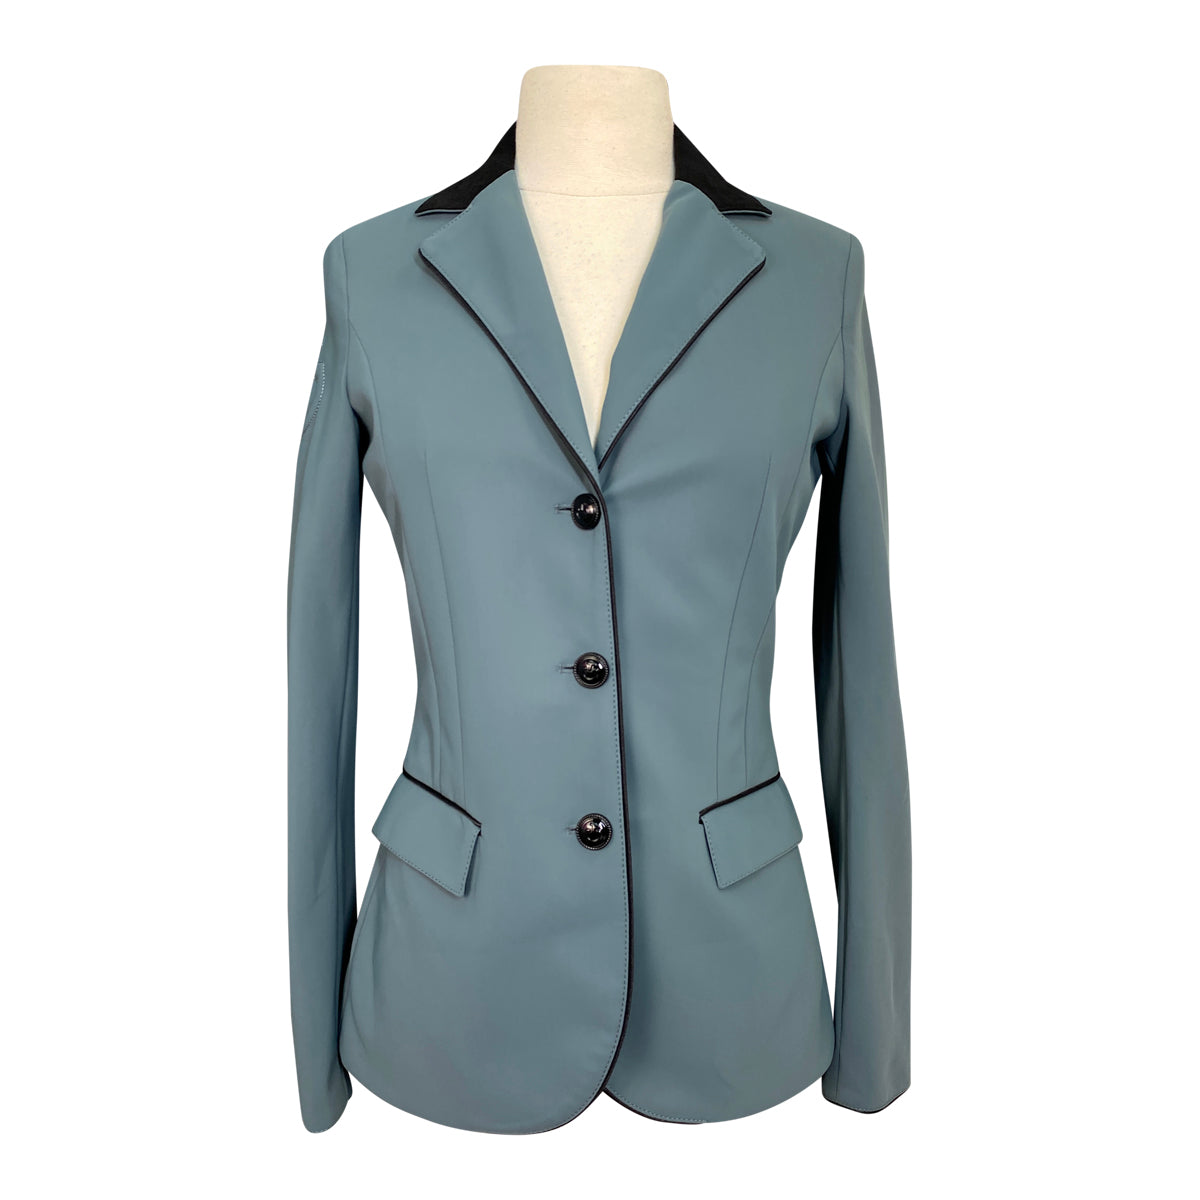 Front of Cavalleria Toscana 'GP' Competition Jacket in Stone Grey